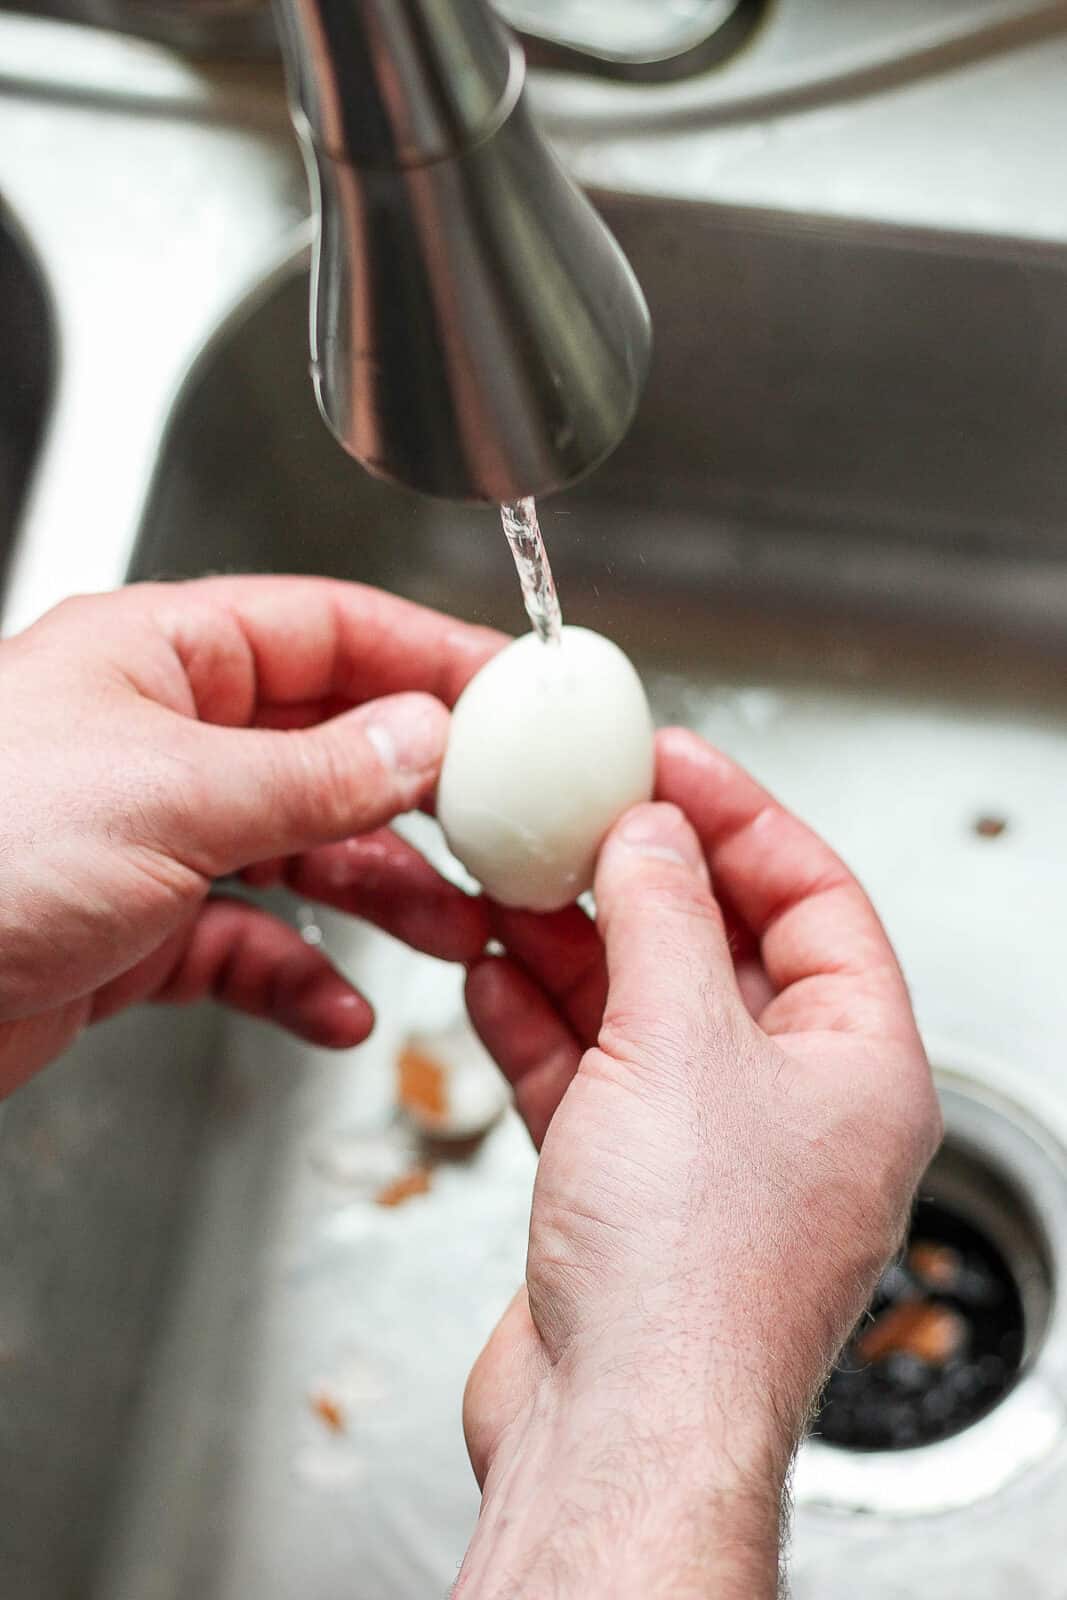 A fully peeled hard boiled egg under running water.